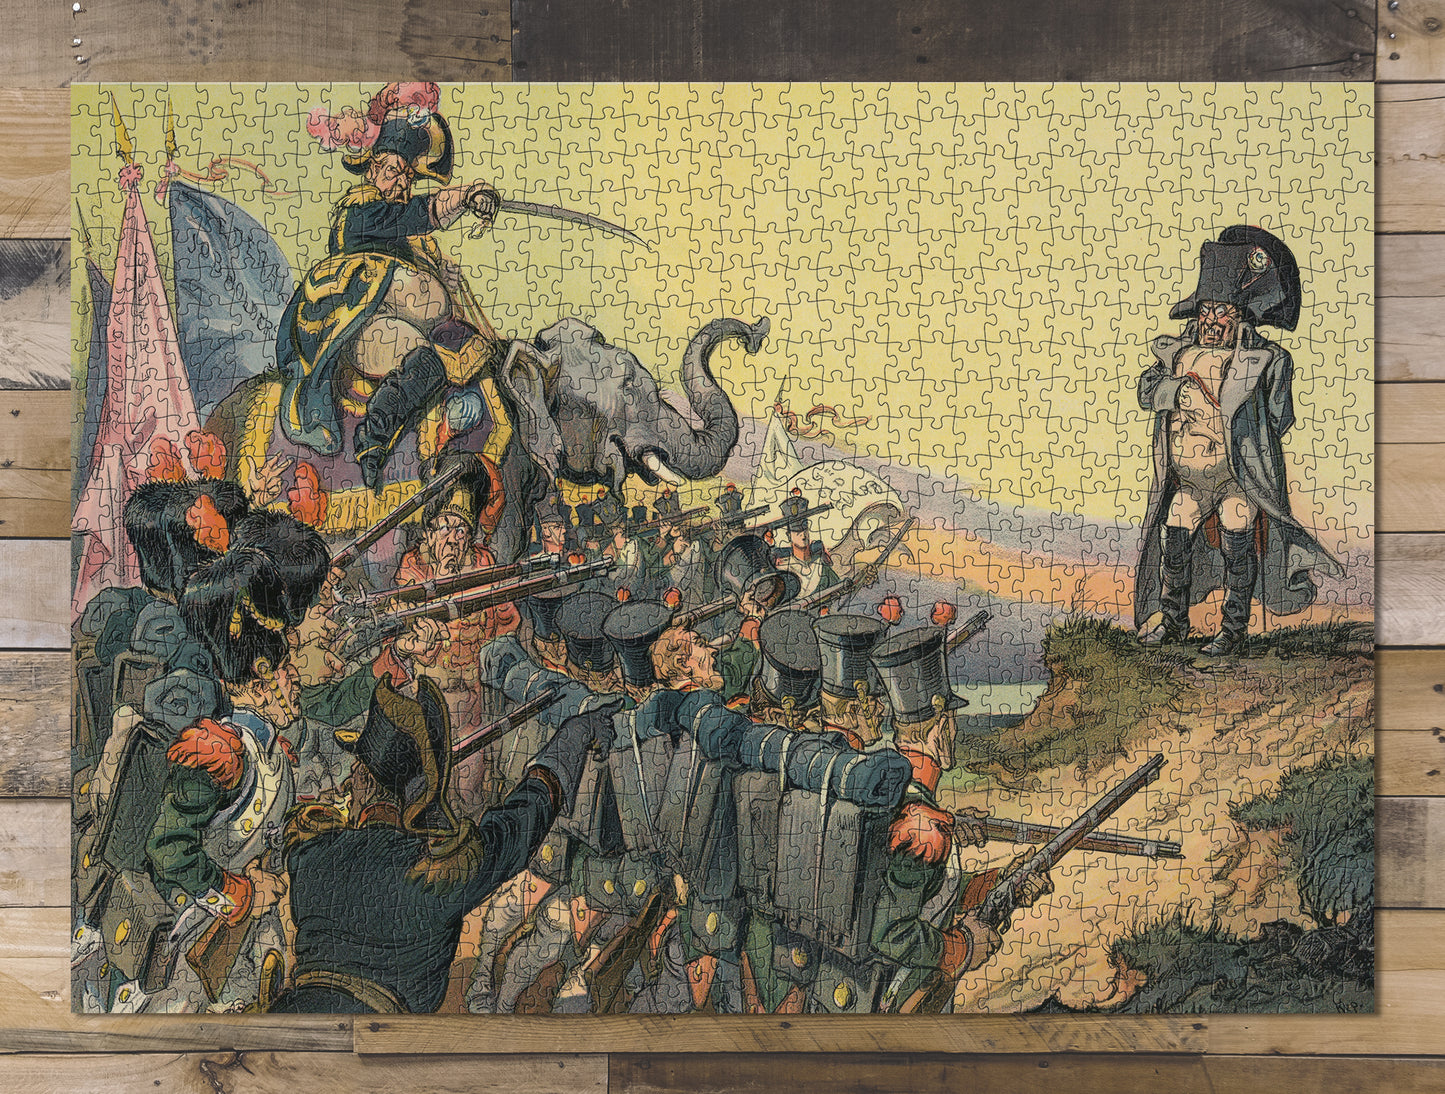 1000 piece puzzle 1912 Photo of Puck Will the history of Napolean's return repeat itself? Keppler